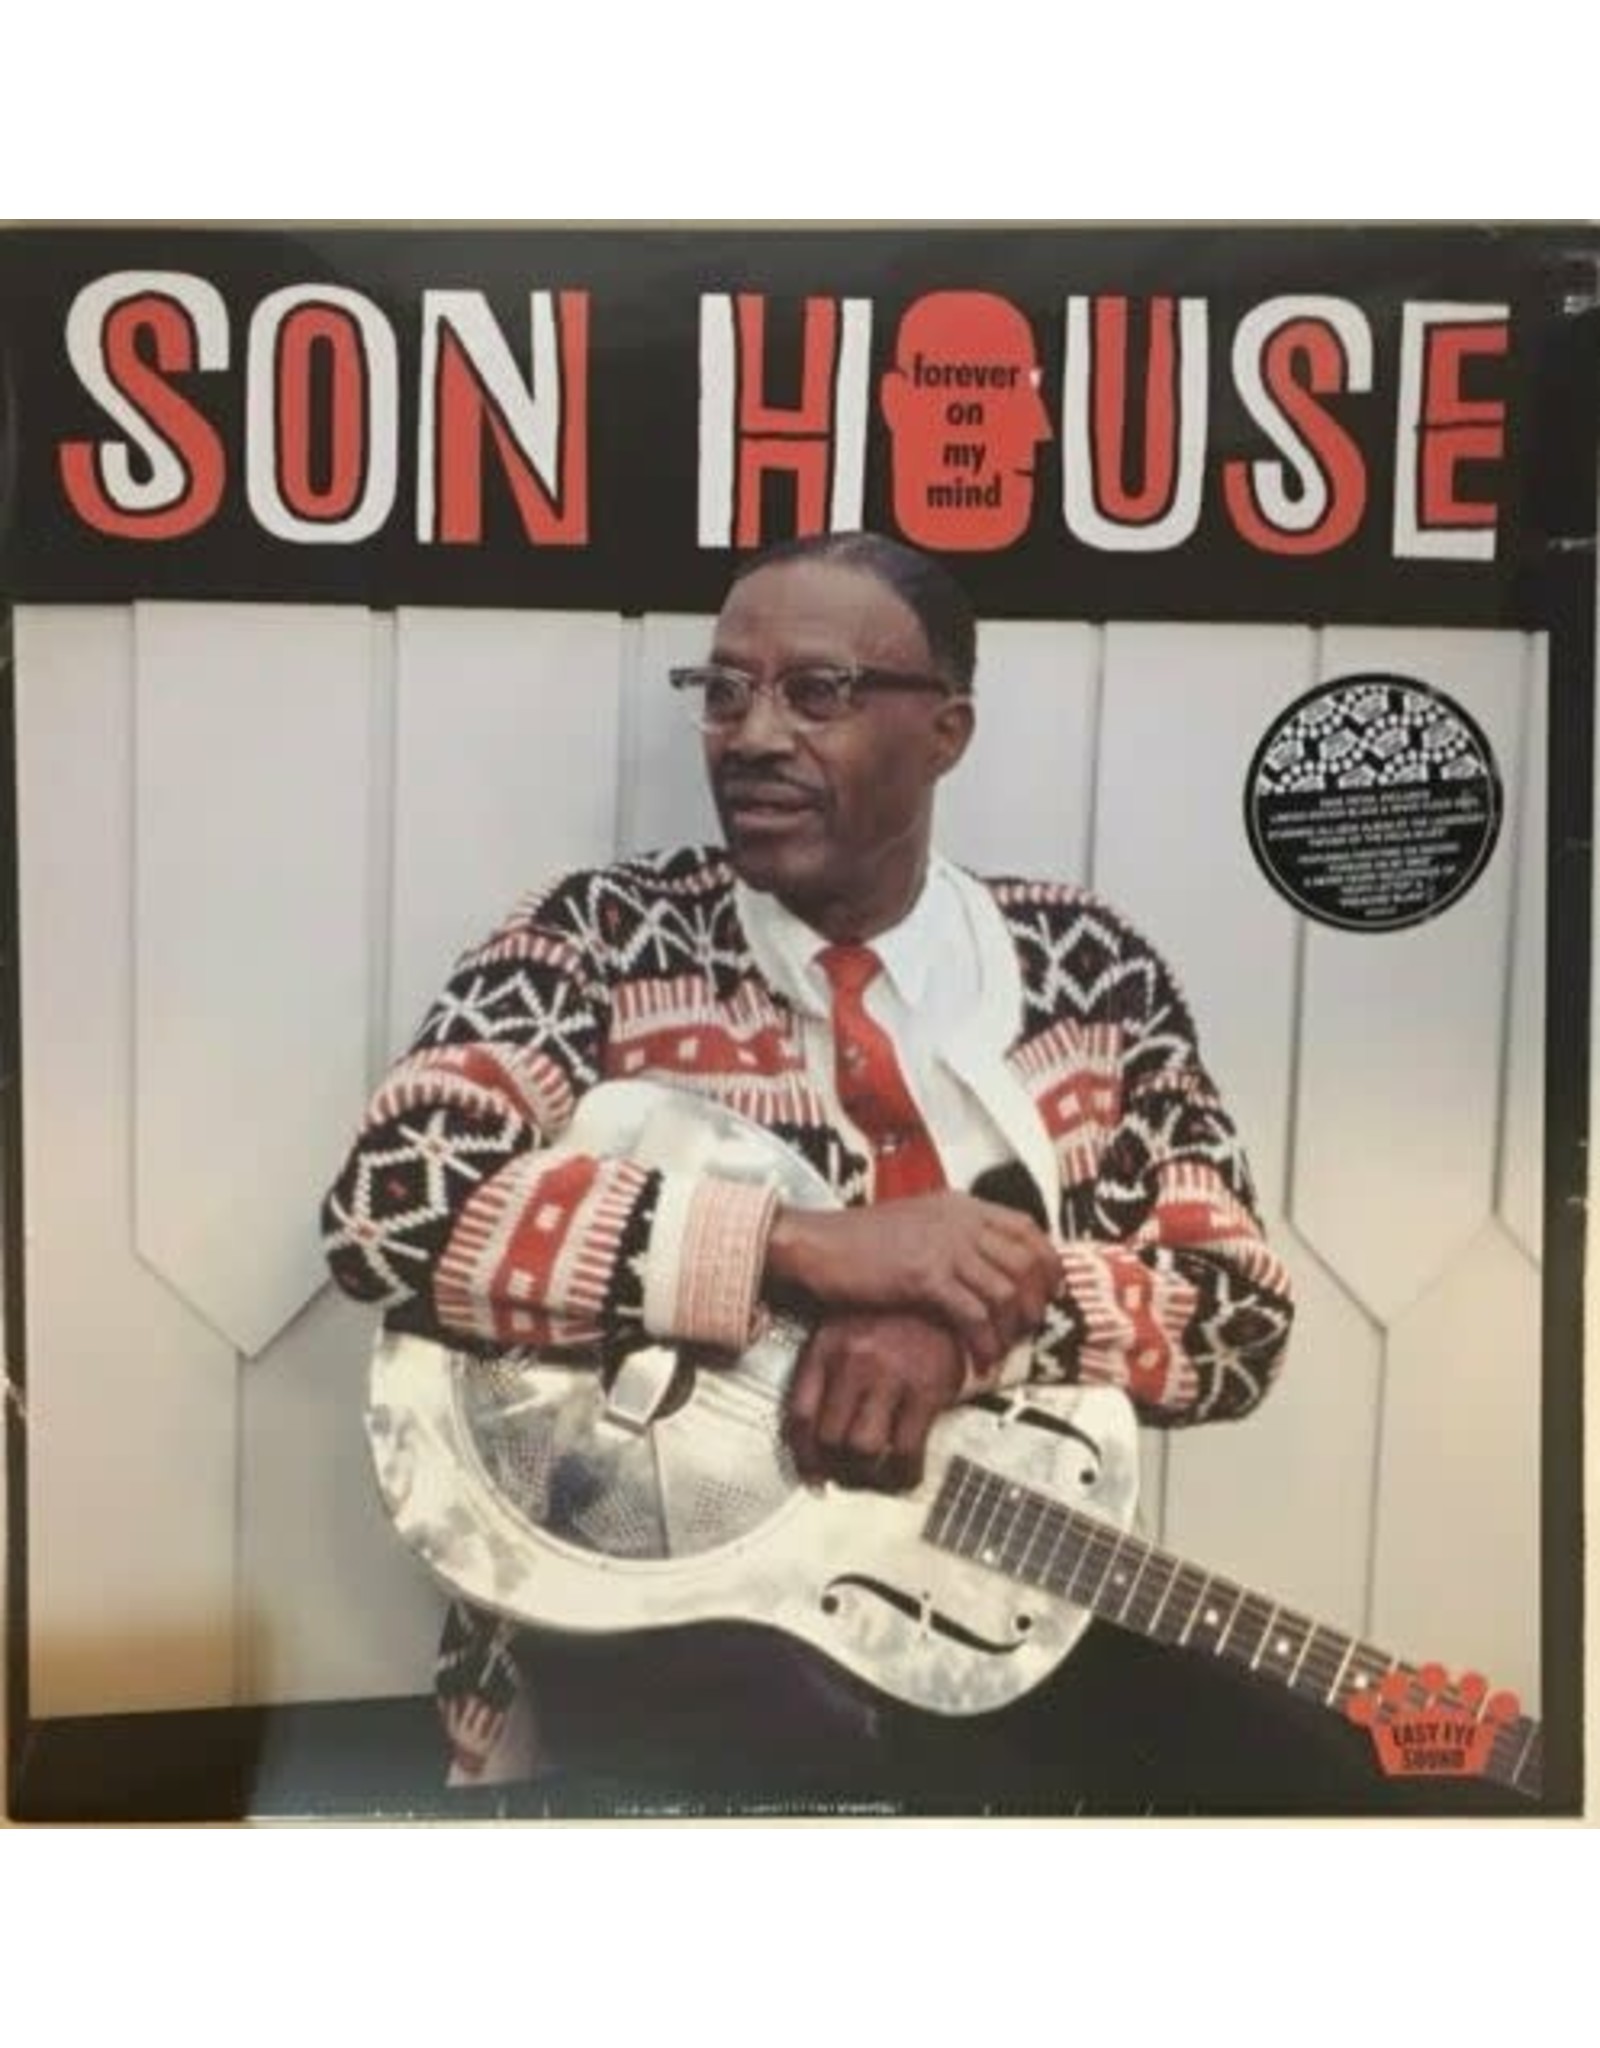 House, Son - Forever On My Mind BLACK AND WHITE FLECK LP